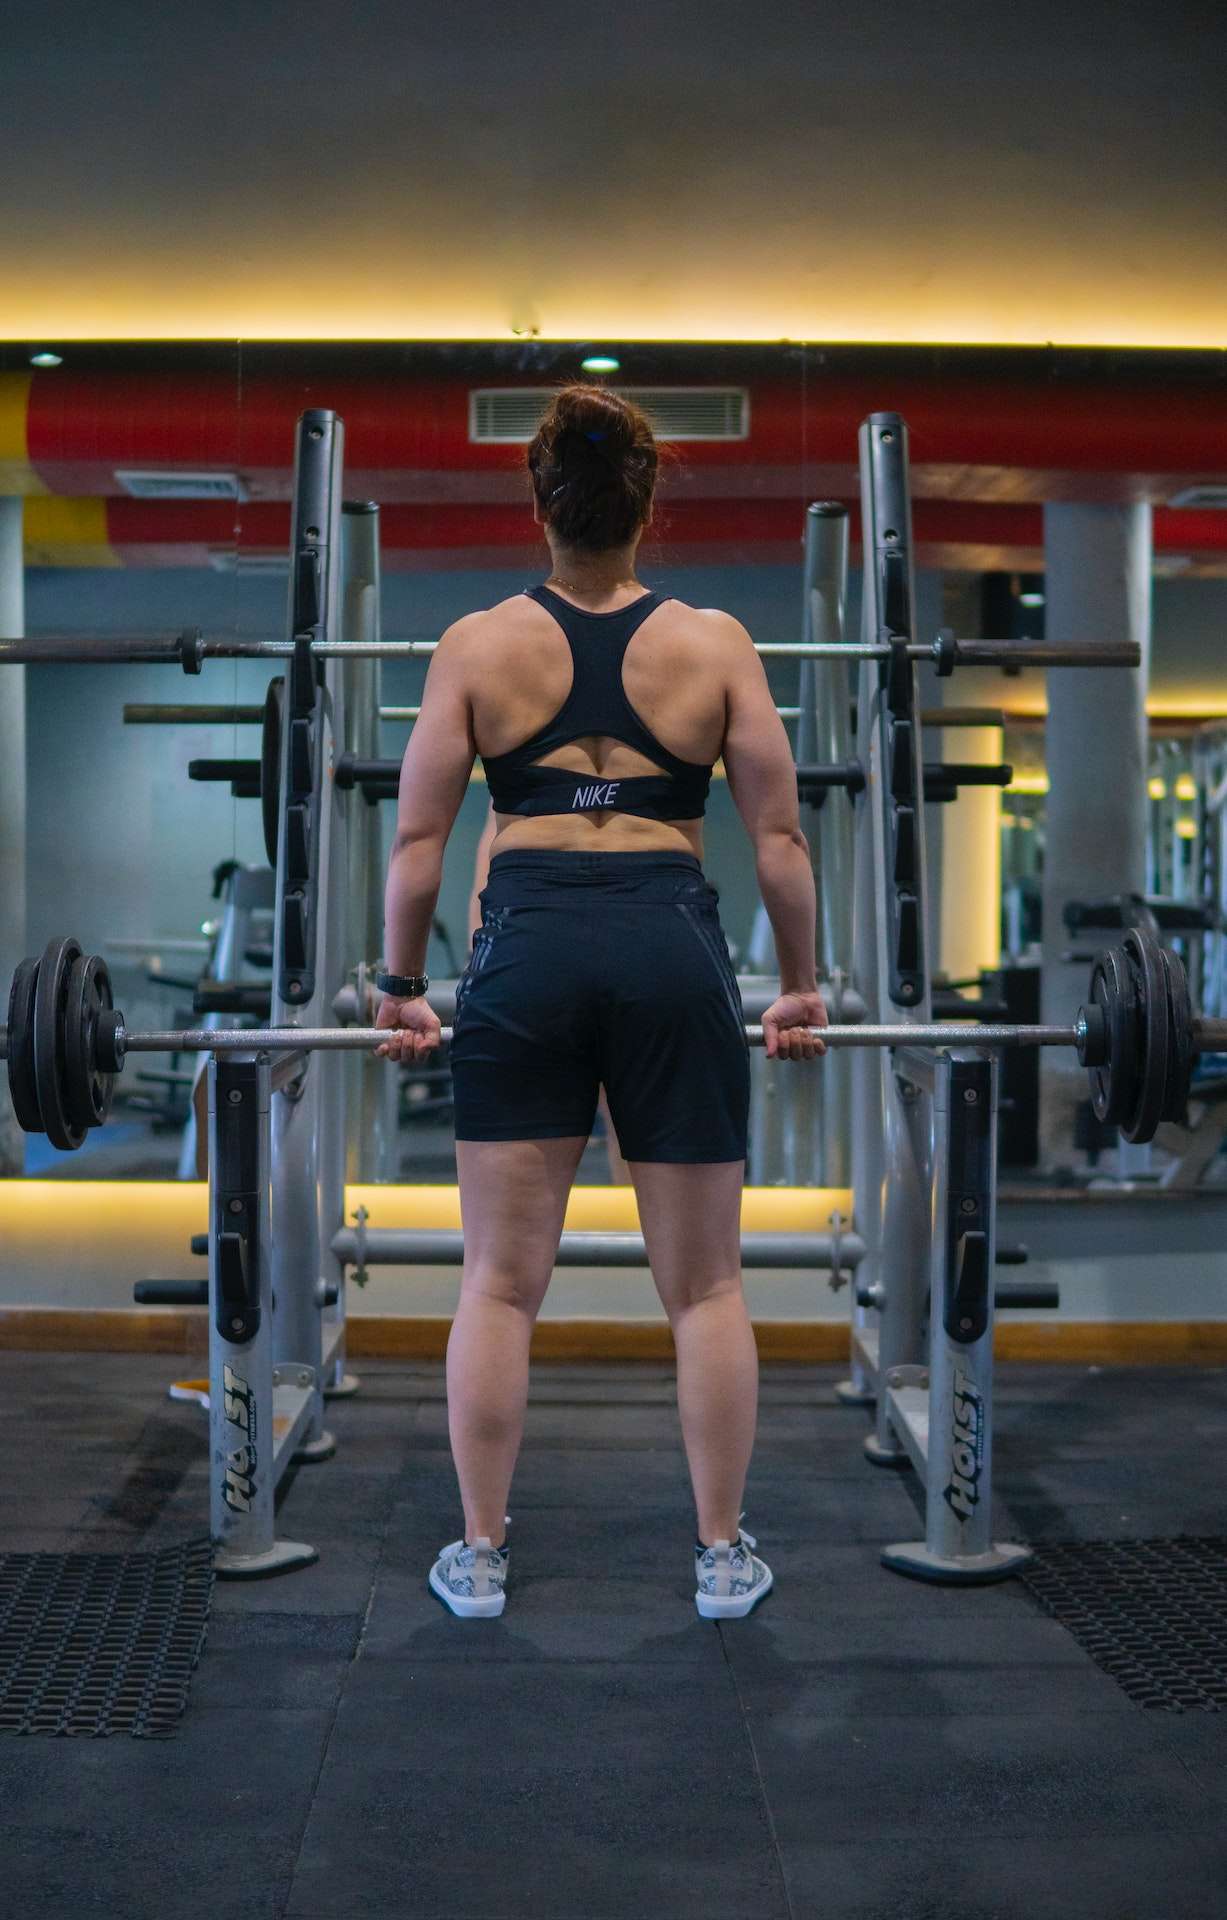 A Woman Lifting Weights in a Gym 